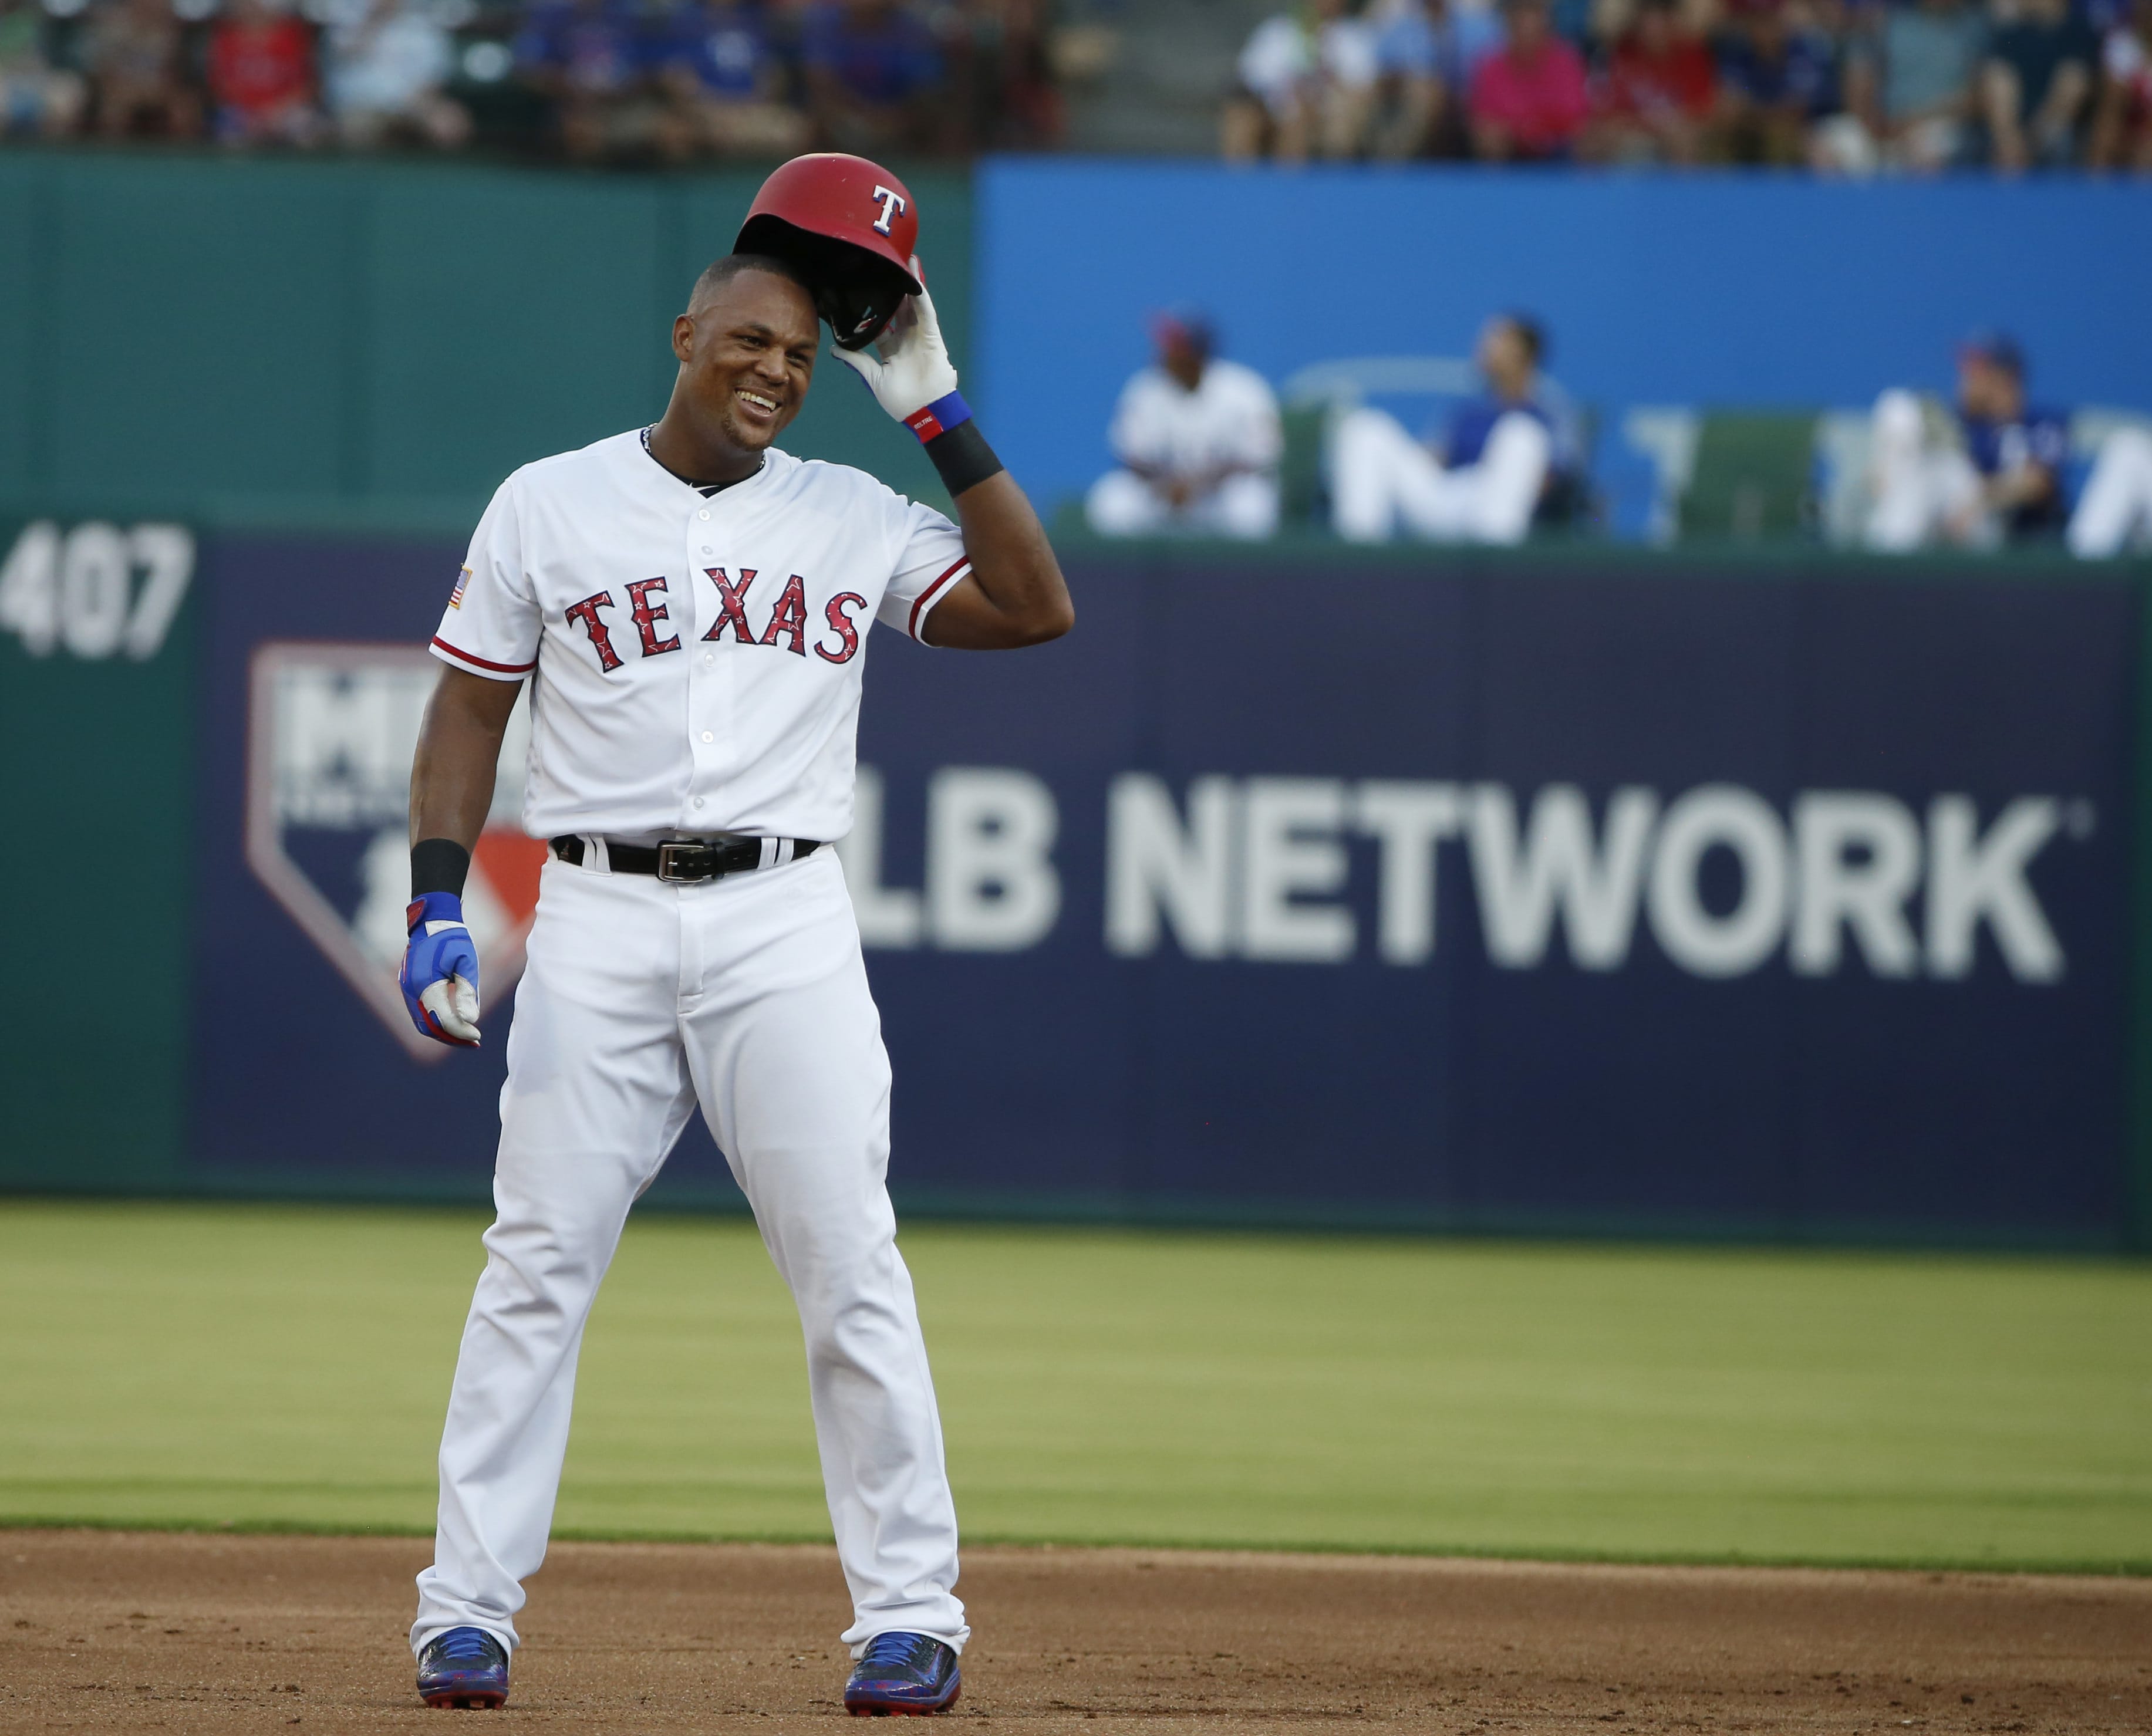 Texas Rangers third baseman Adrian Beltre has decided to retire after 21 seasons and 3,166 hits in the majors leagues. Beltre announced his decision in a statement released by the Rangers on Tuesday morning, Nov. 20, 2018.